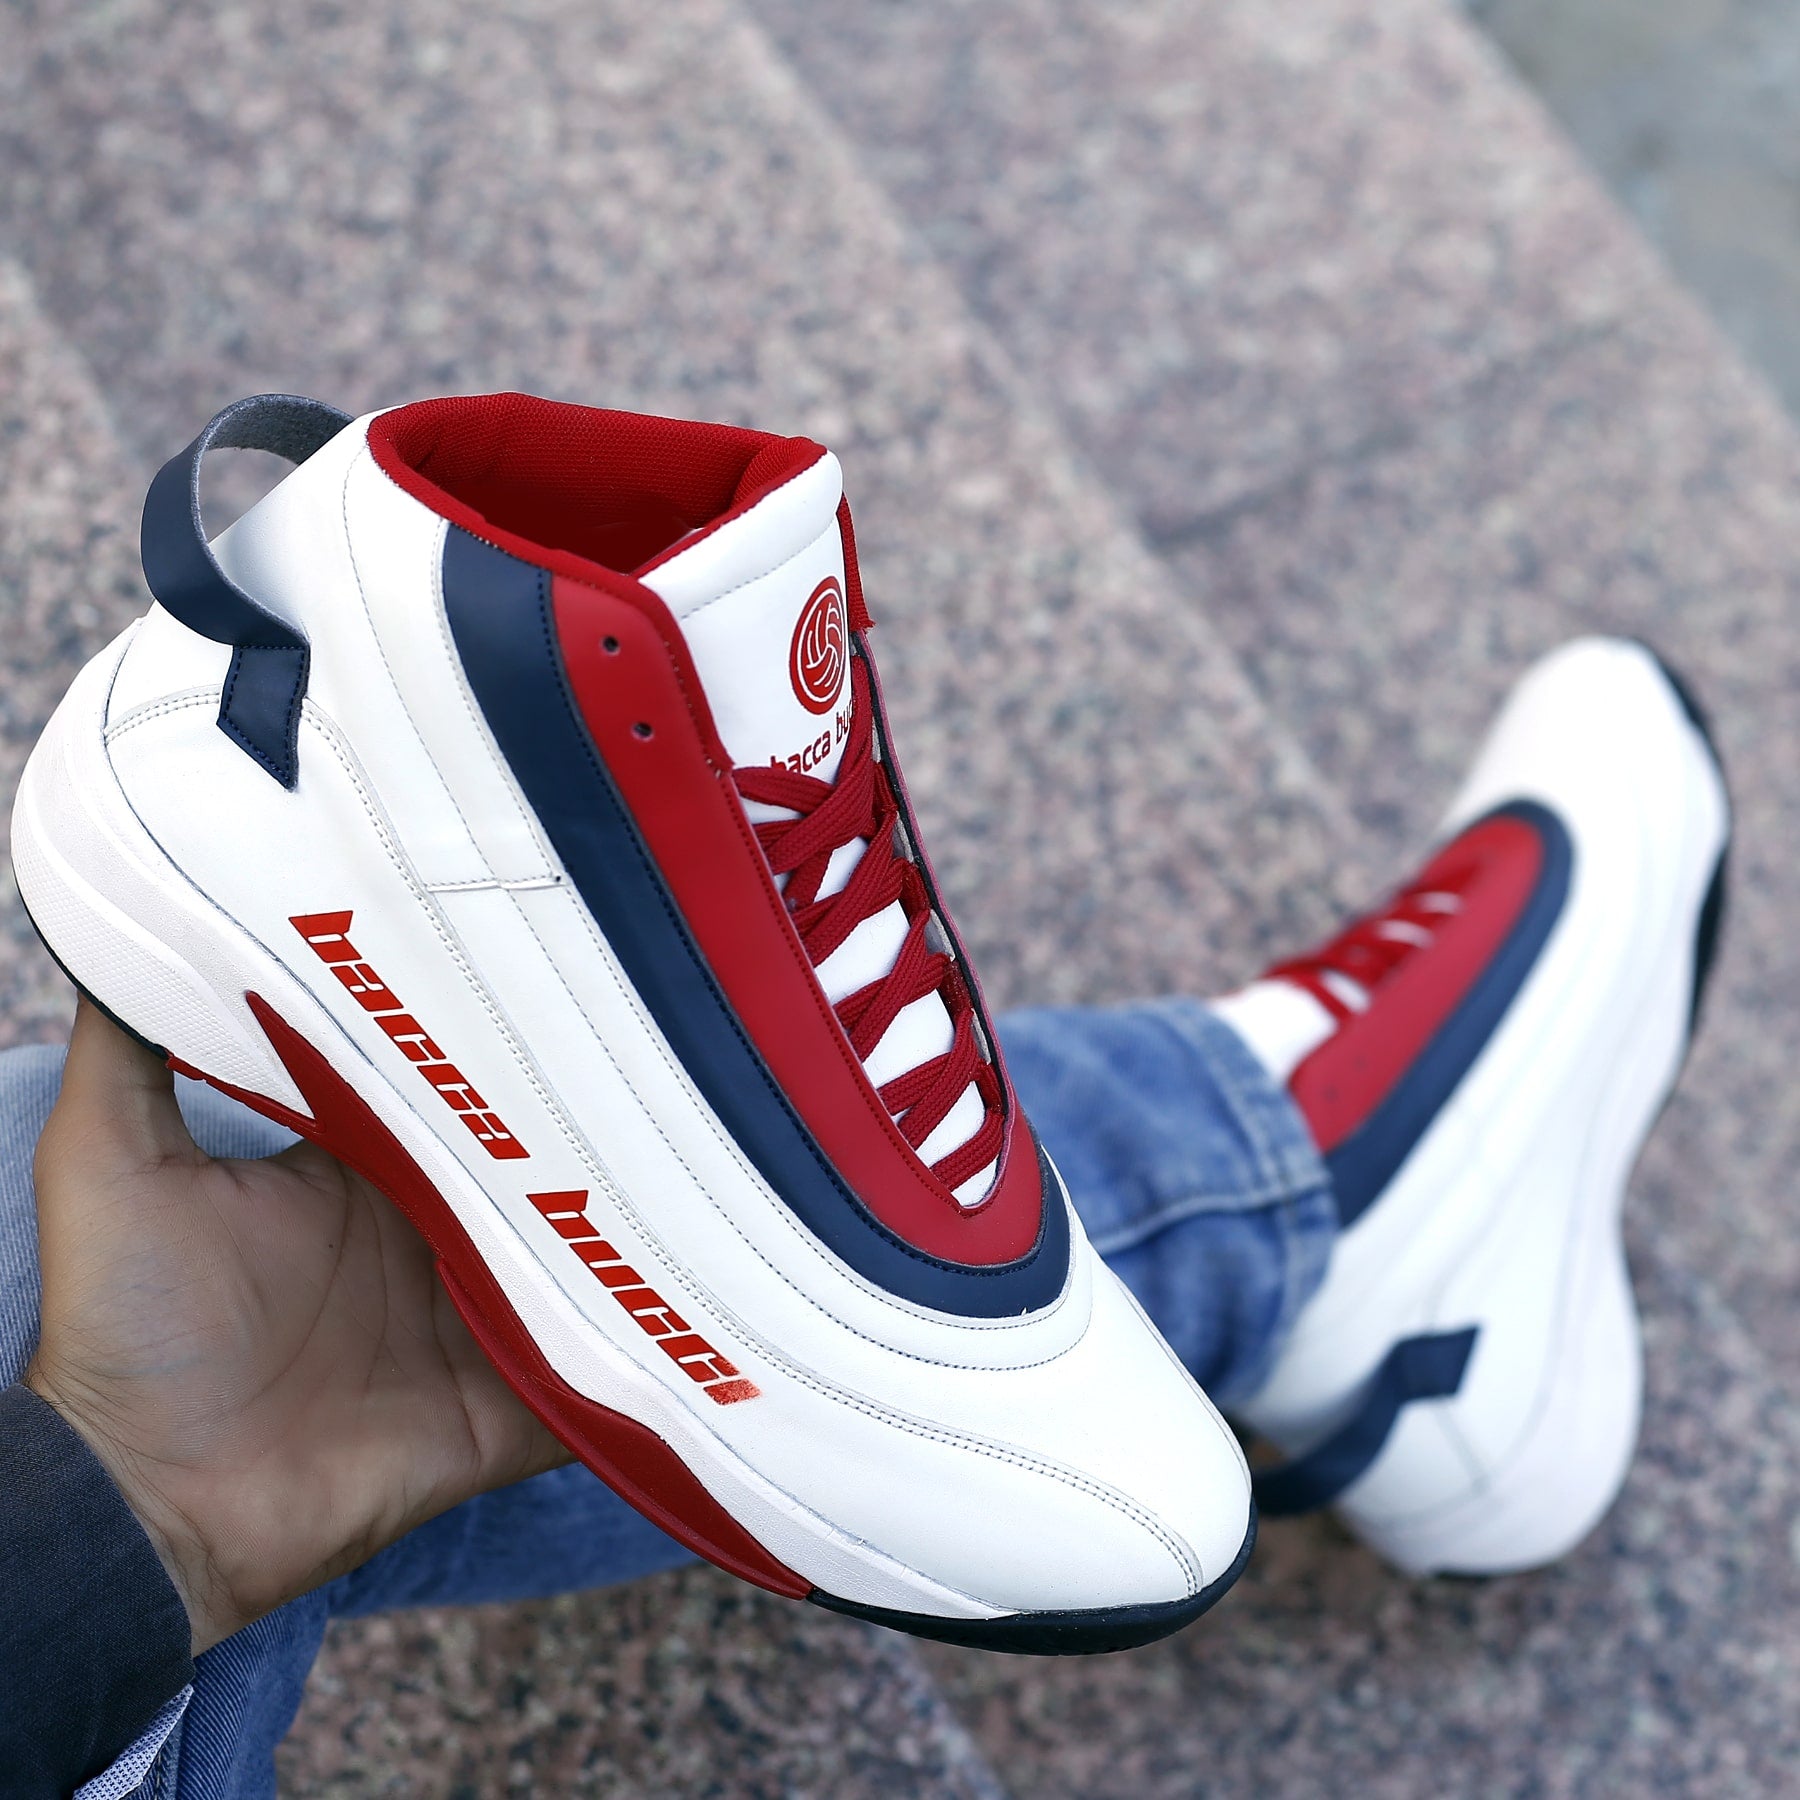 white sneakers for men, red white sneakers for men, casual mens fashion sneakers, high top sneakers, high sole shoes for men